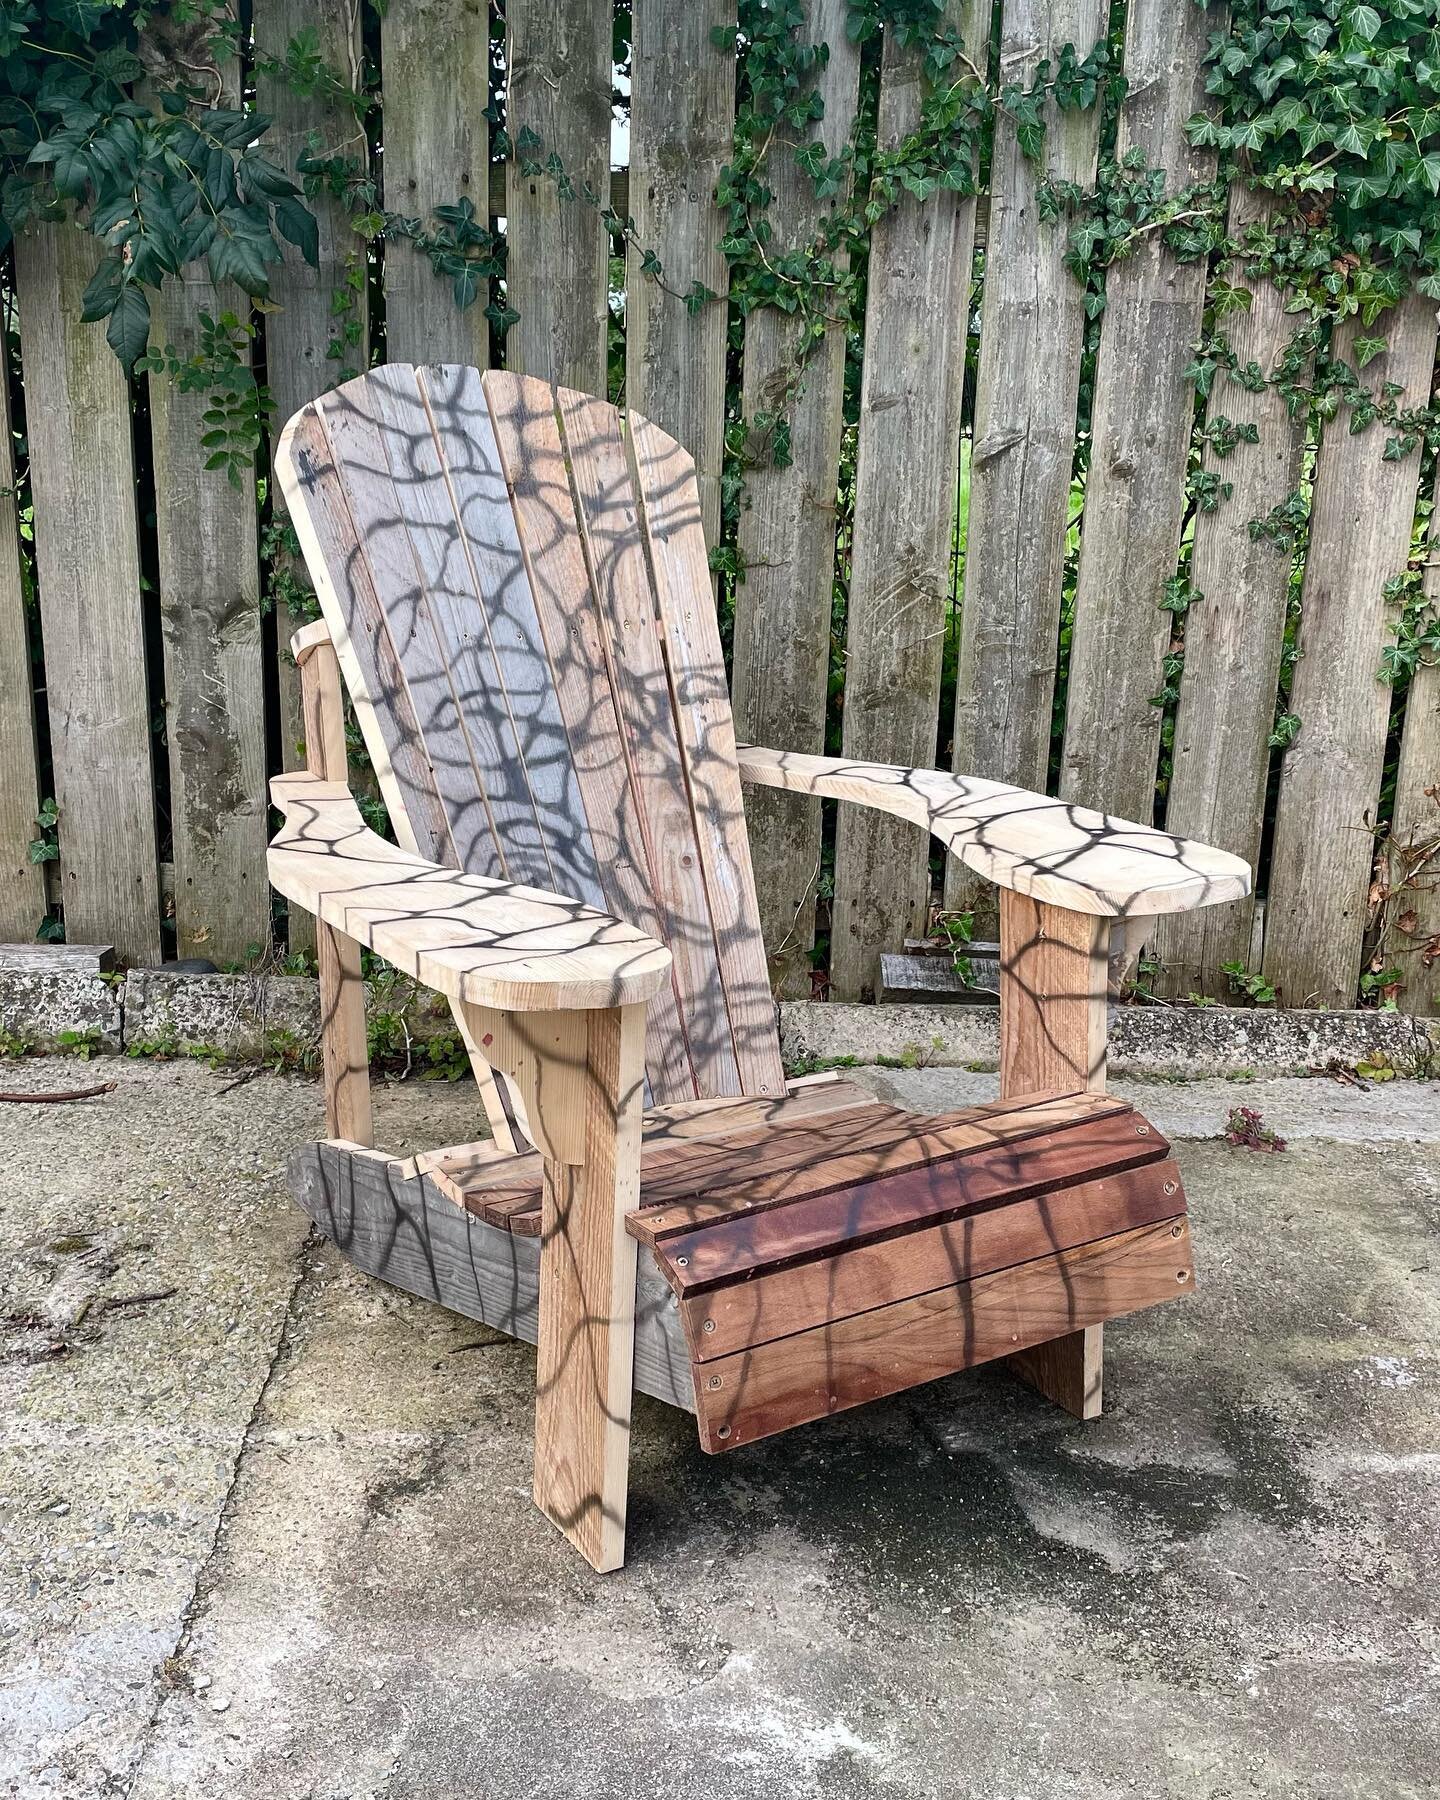 custom airbrushed adirondack made from recycled pallets and factory offcuts. left the planks unsanded for more colour variation